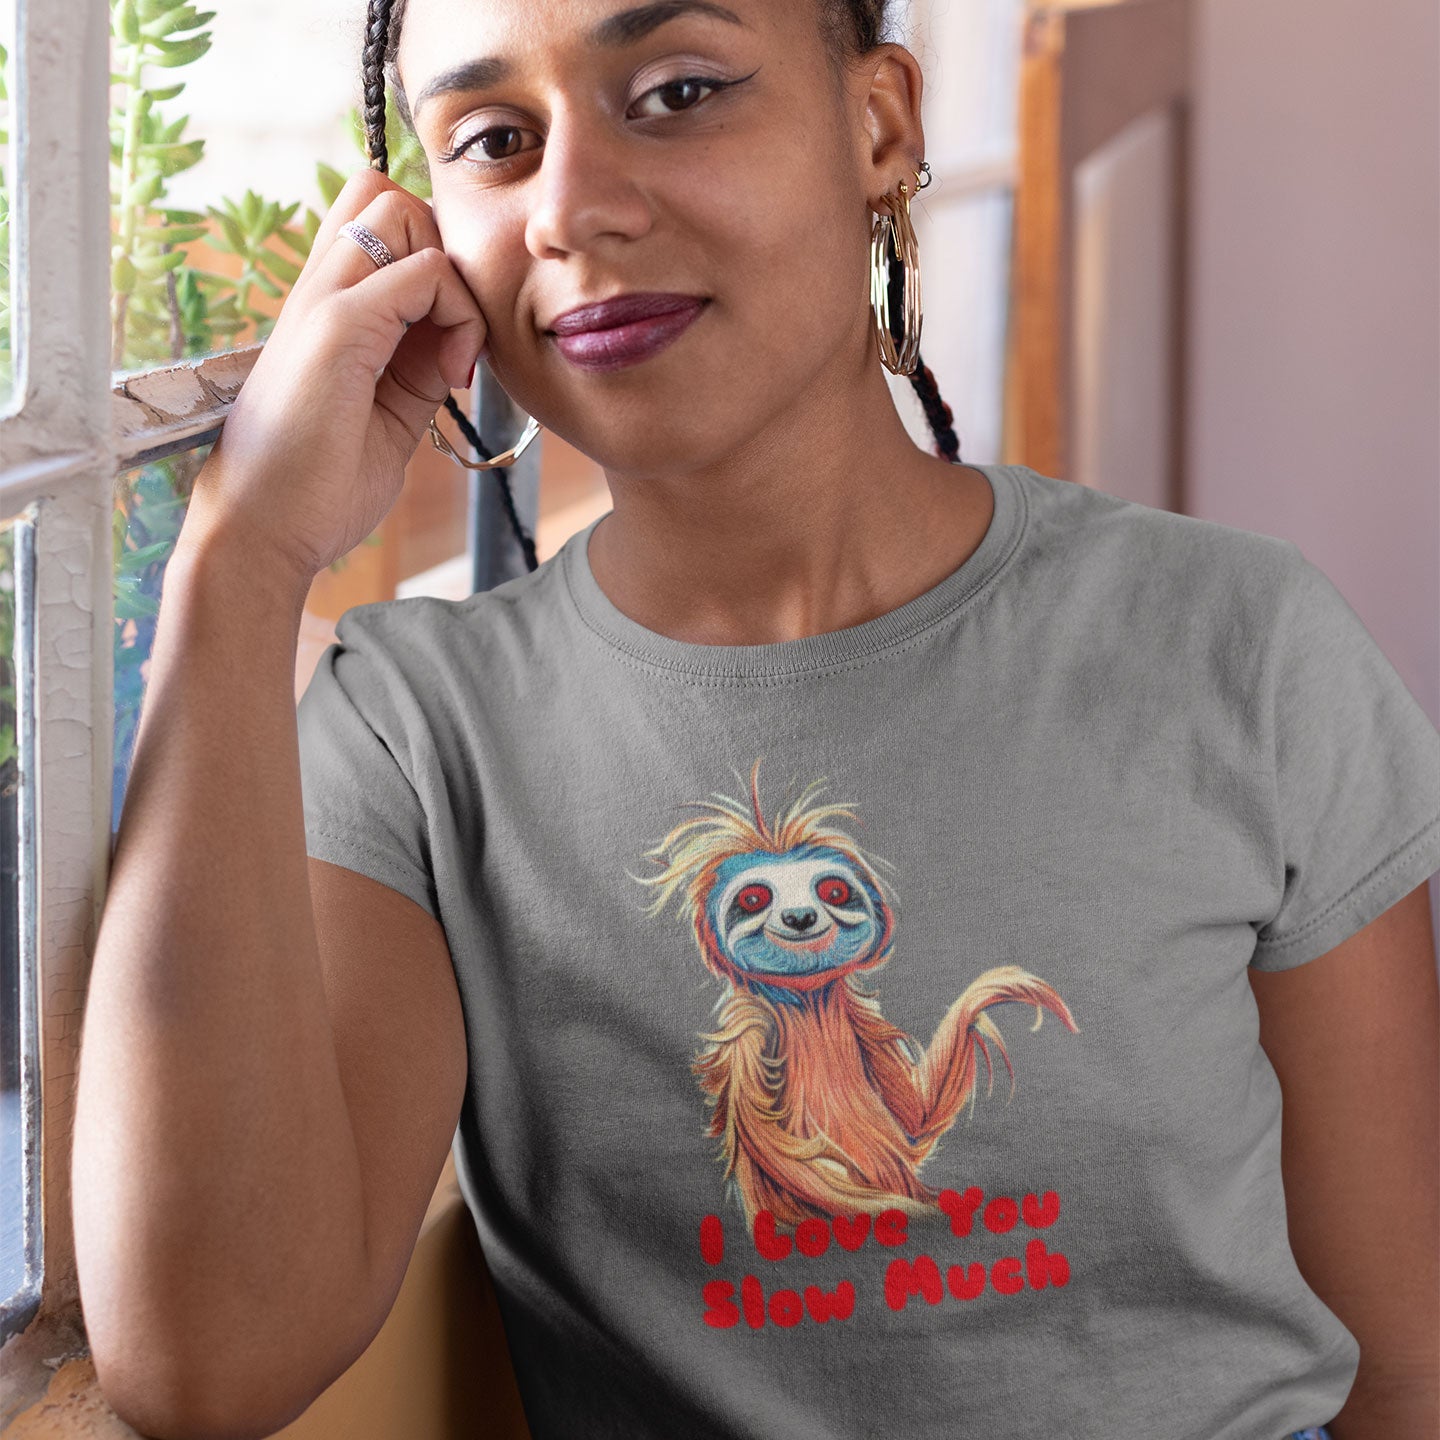 Woman wearing a t-shirt with a sloth and the caption I love you slow much